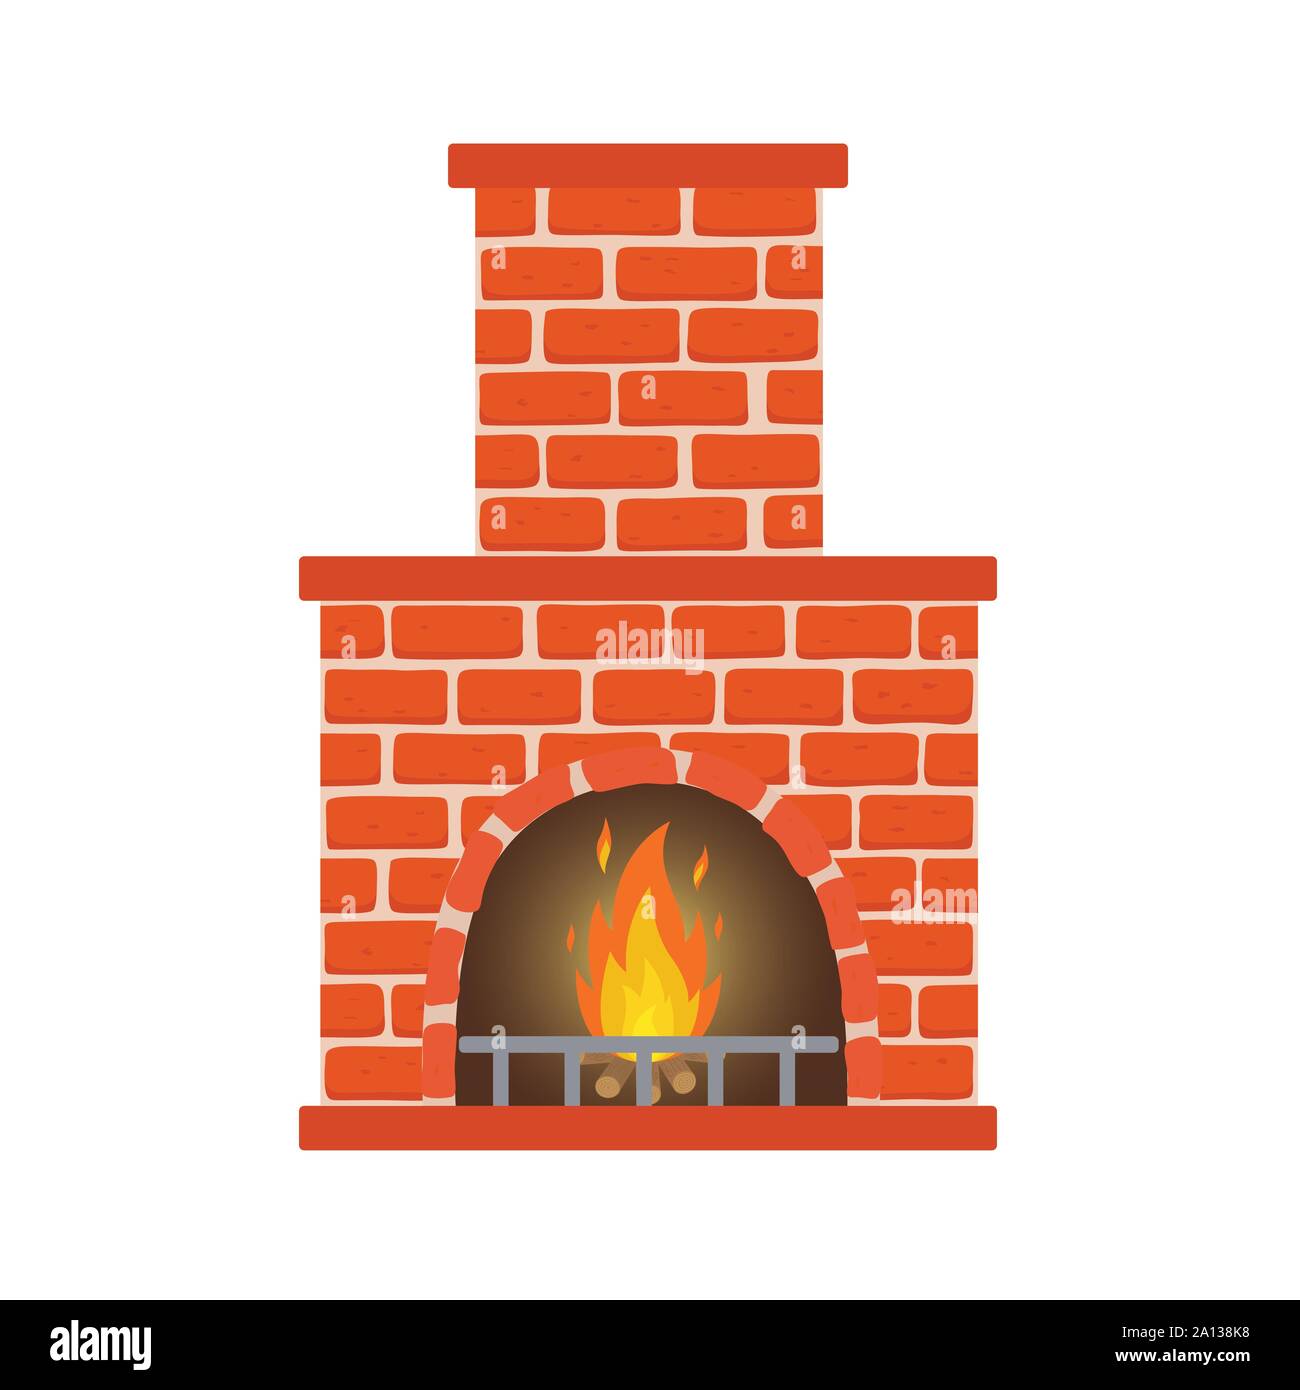 Winter interior bonfire. Classic fireplace made of red bricks, bright burning flame and smoldering logs inside. Home fireplace for comfort and Stock Vector